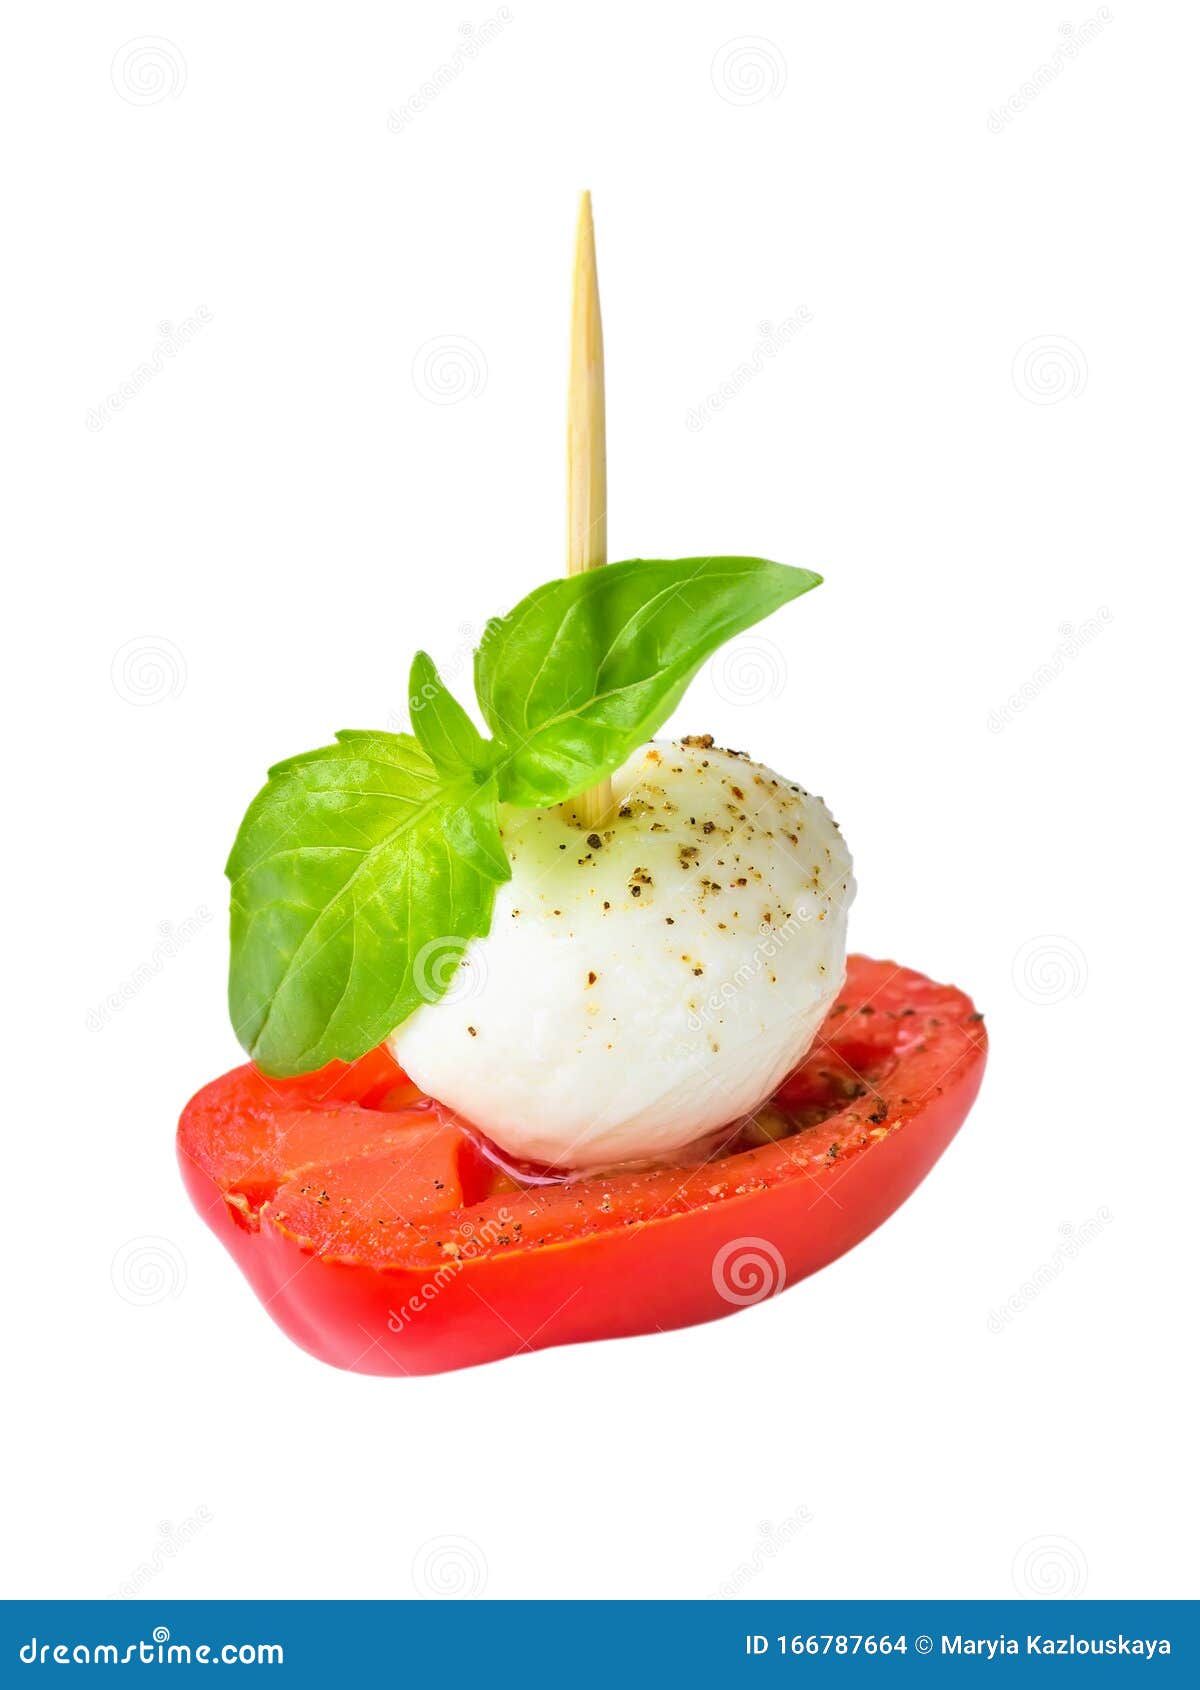 close-up of fresh caprese skewer with mozarella and tomato  on withe background. healhy mediterranean cuisine and